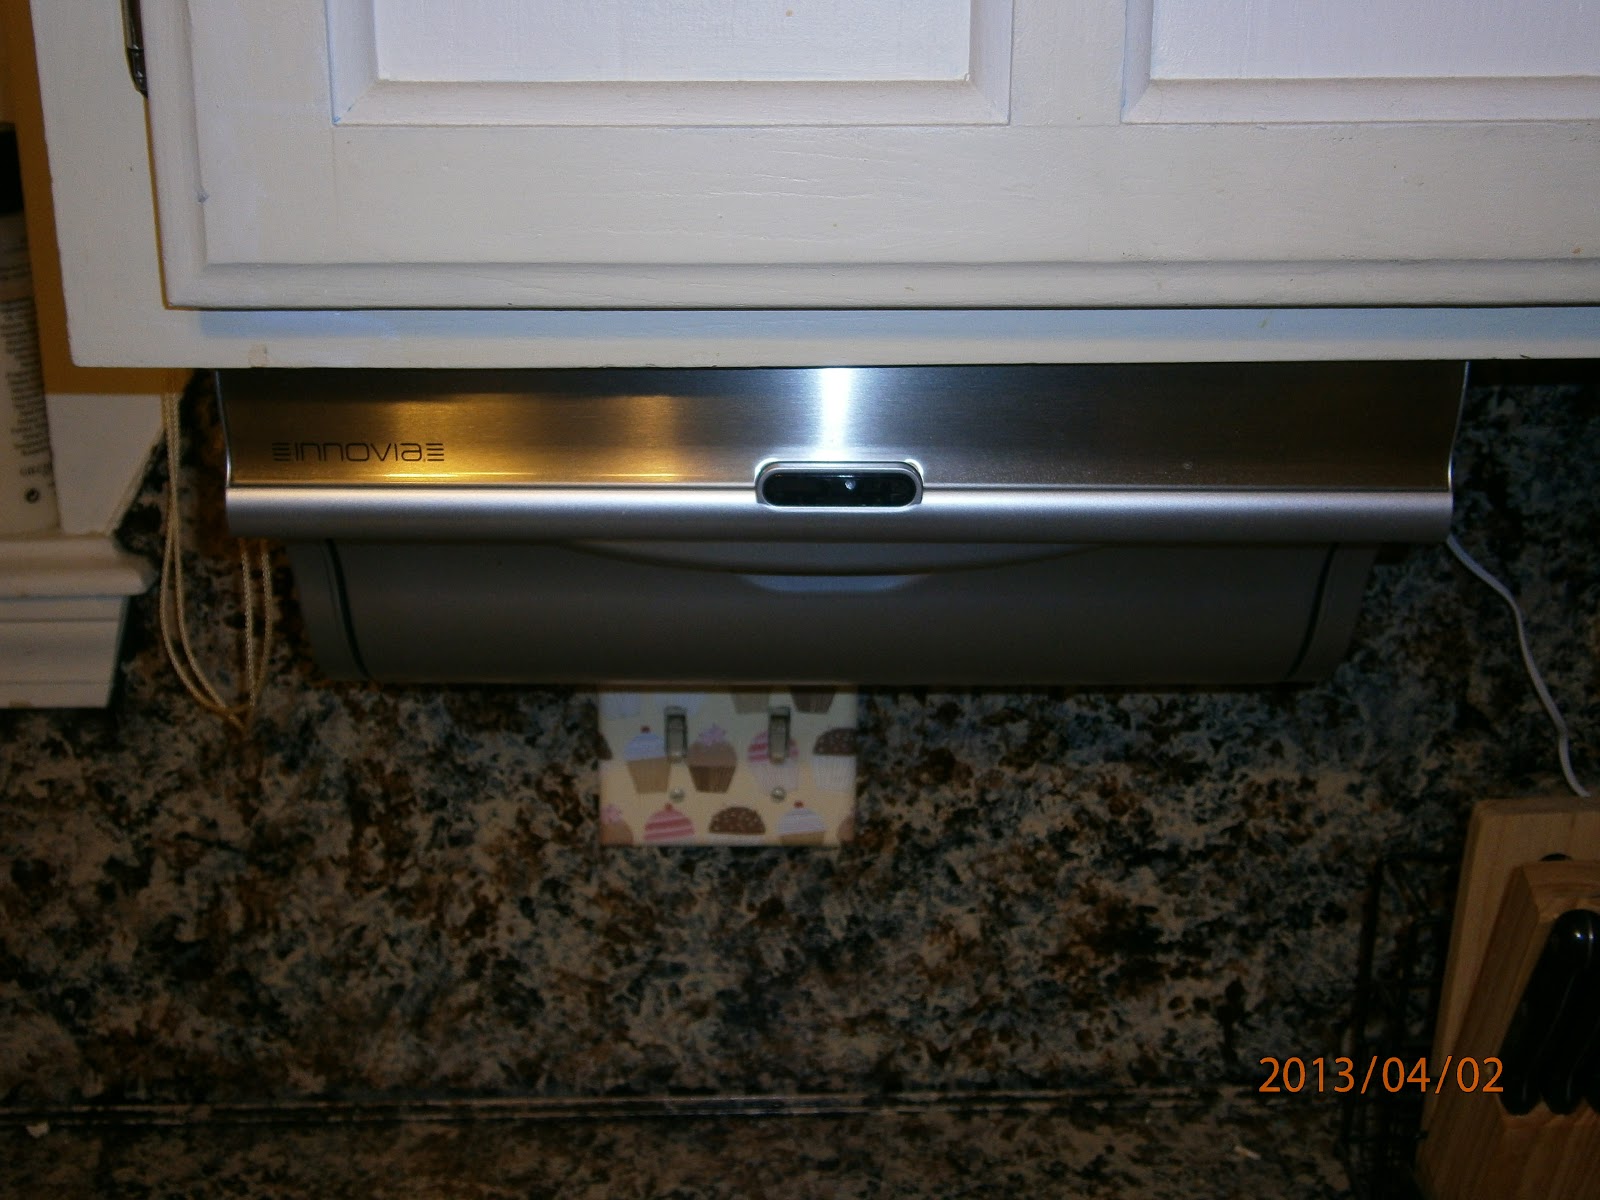 Innovia Paper Towel Dispenser (Review & Giveaway) - Mommy's Block